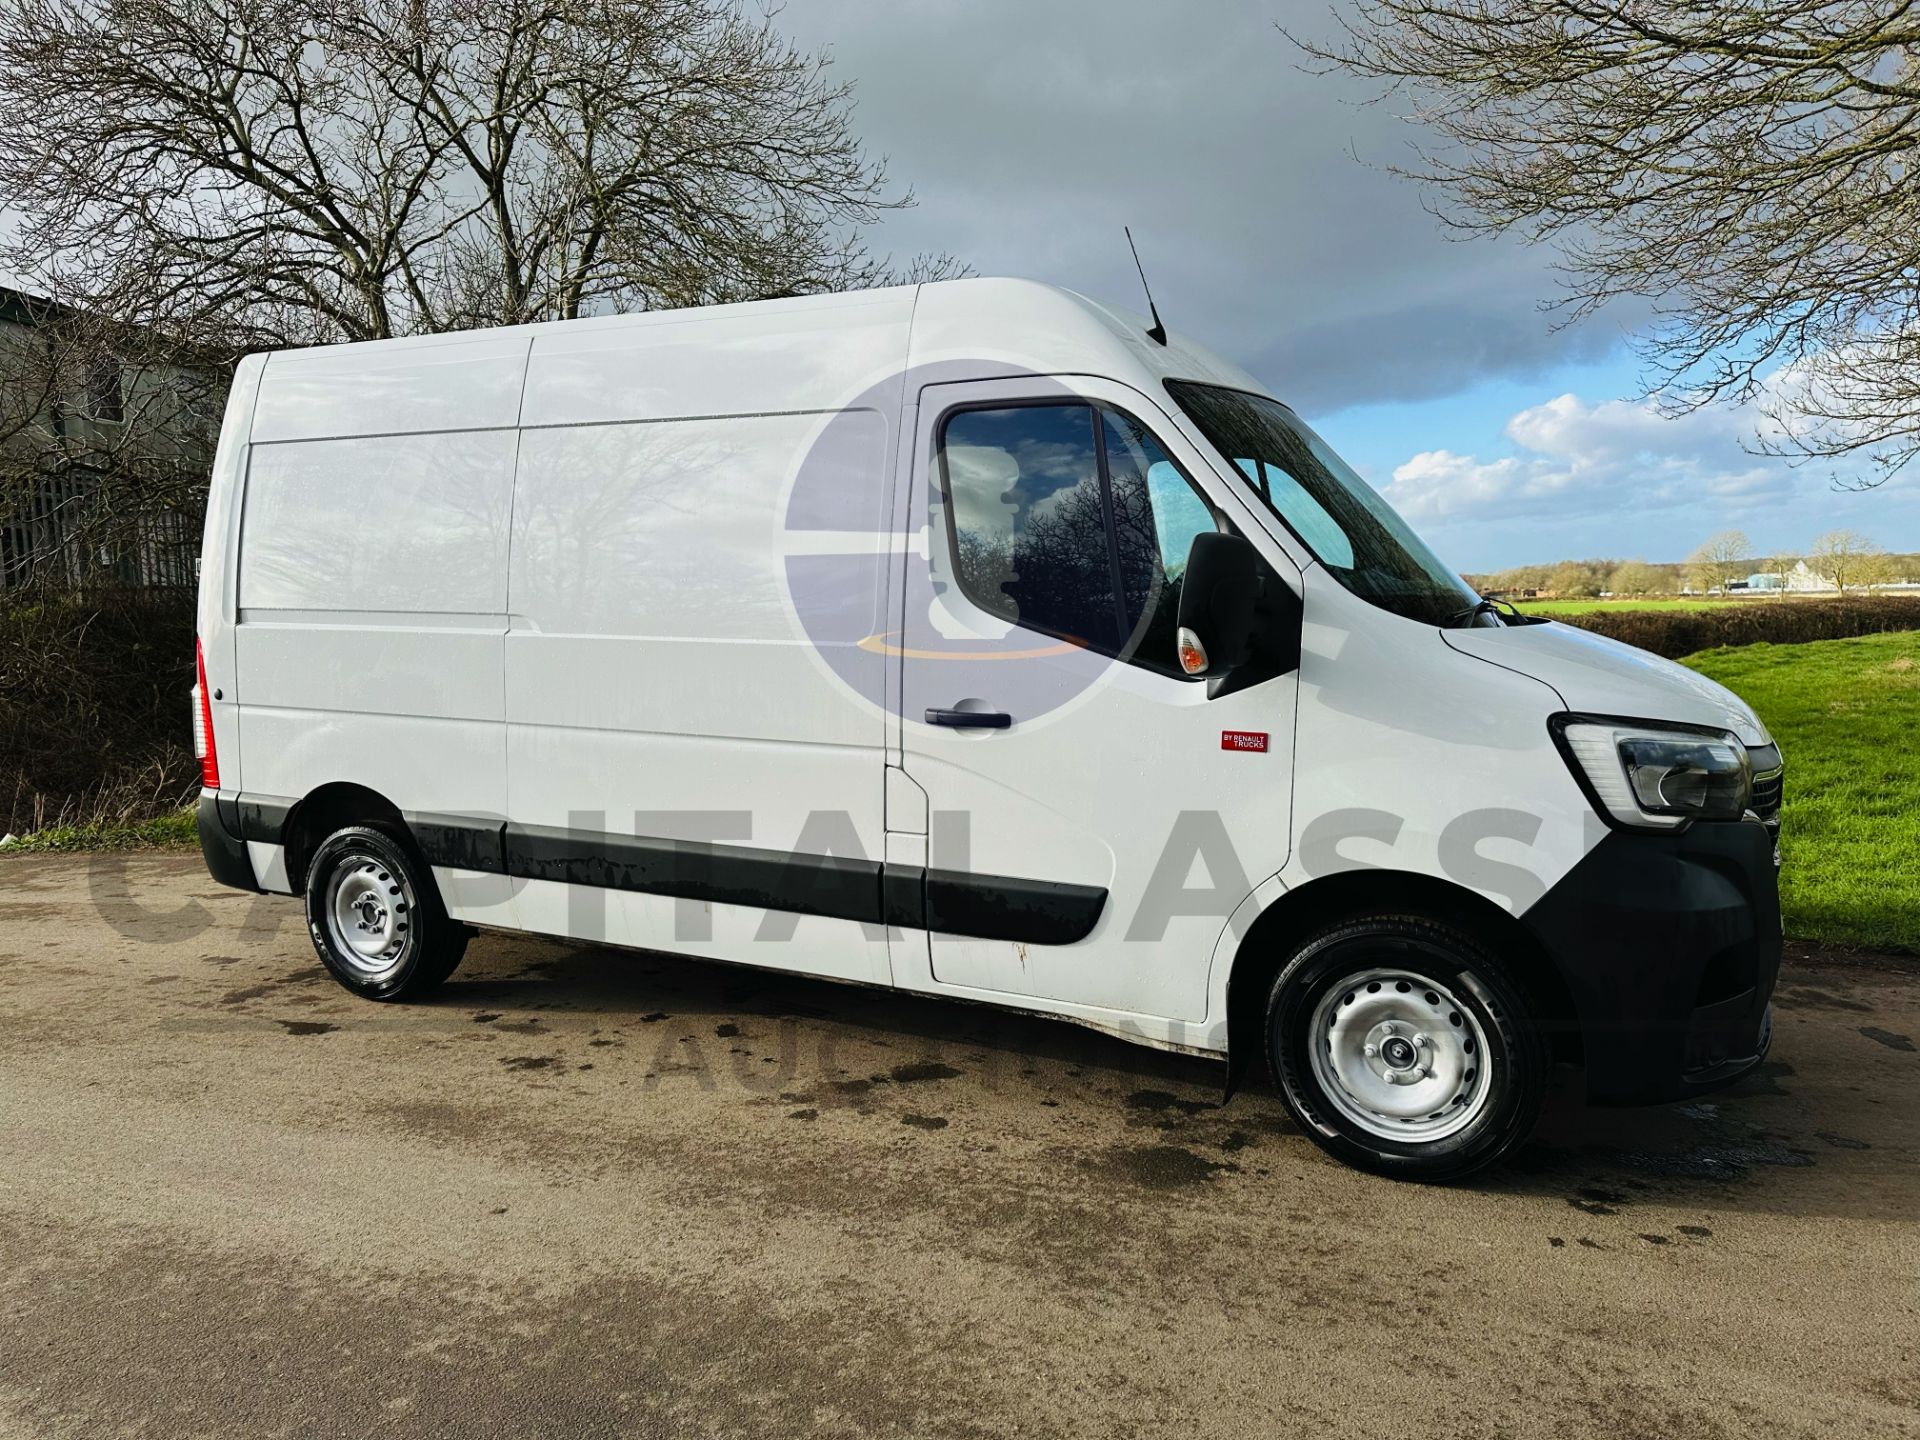 (ON SALE) RENAULT MASTER 2.3 DCI 3.5T *BUSINESS EDITION* MWB - 2021 MODEL - 1 OWNER - EURO 6